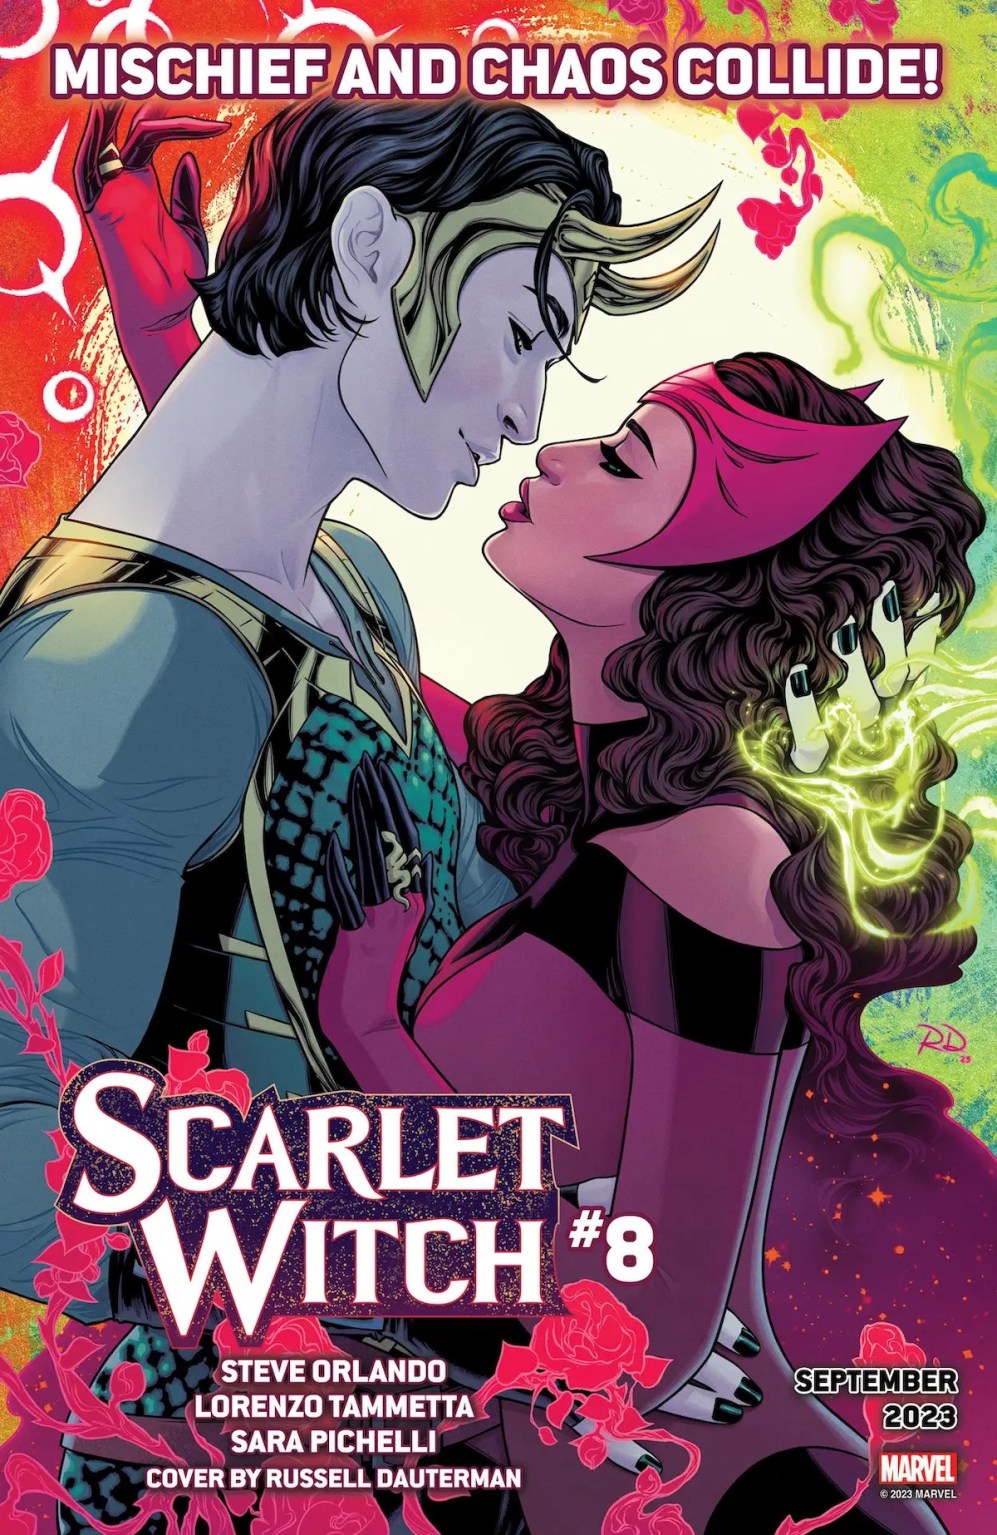 Are Loki and the Scarlet Witch Hooking Up? | The Mary Sue